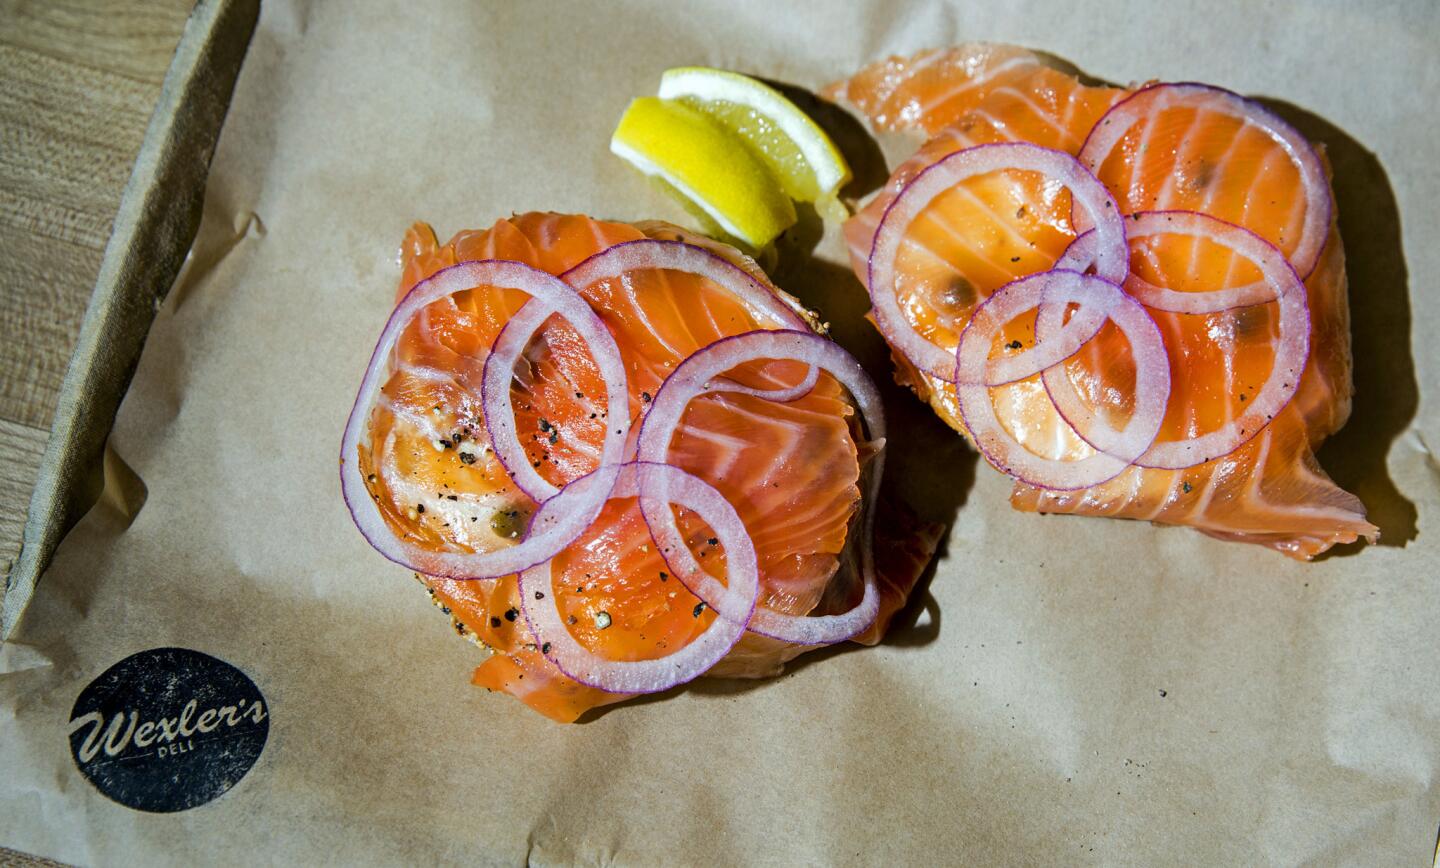 Lox, bagel and cream cheese at Wexler's Deli